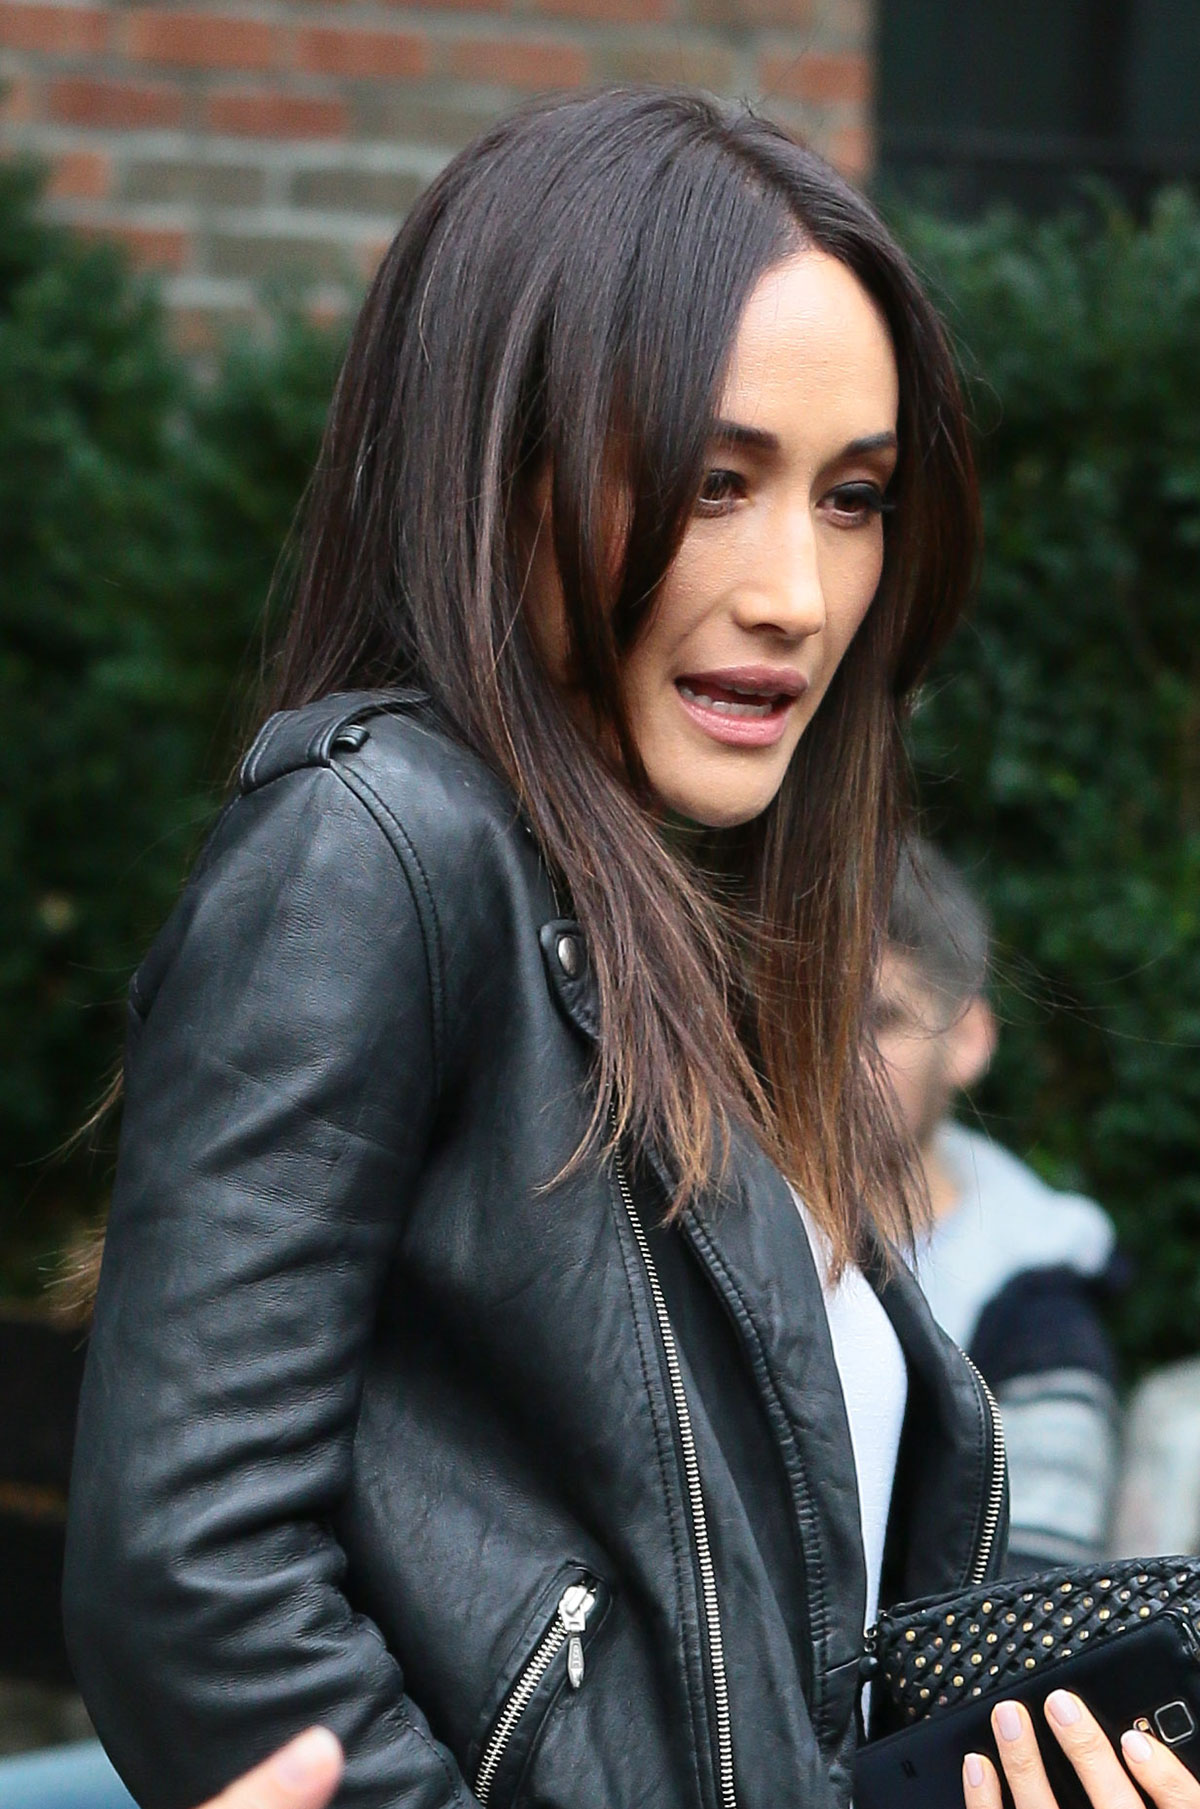 Maggie Q was spotted leaving the Bowery Hotel